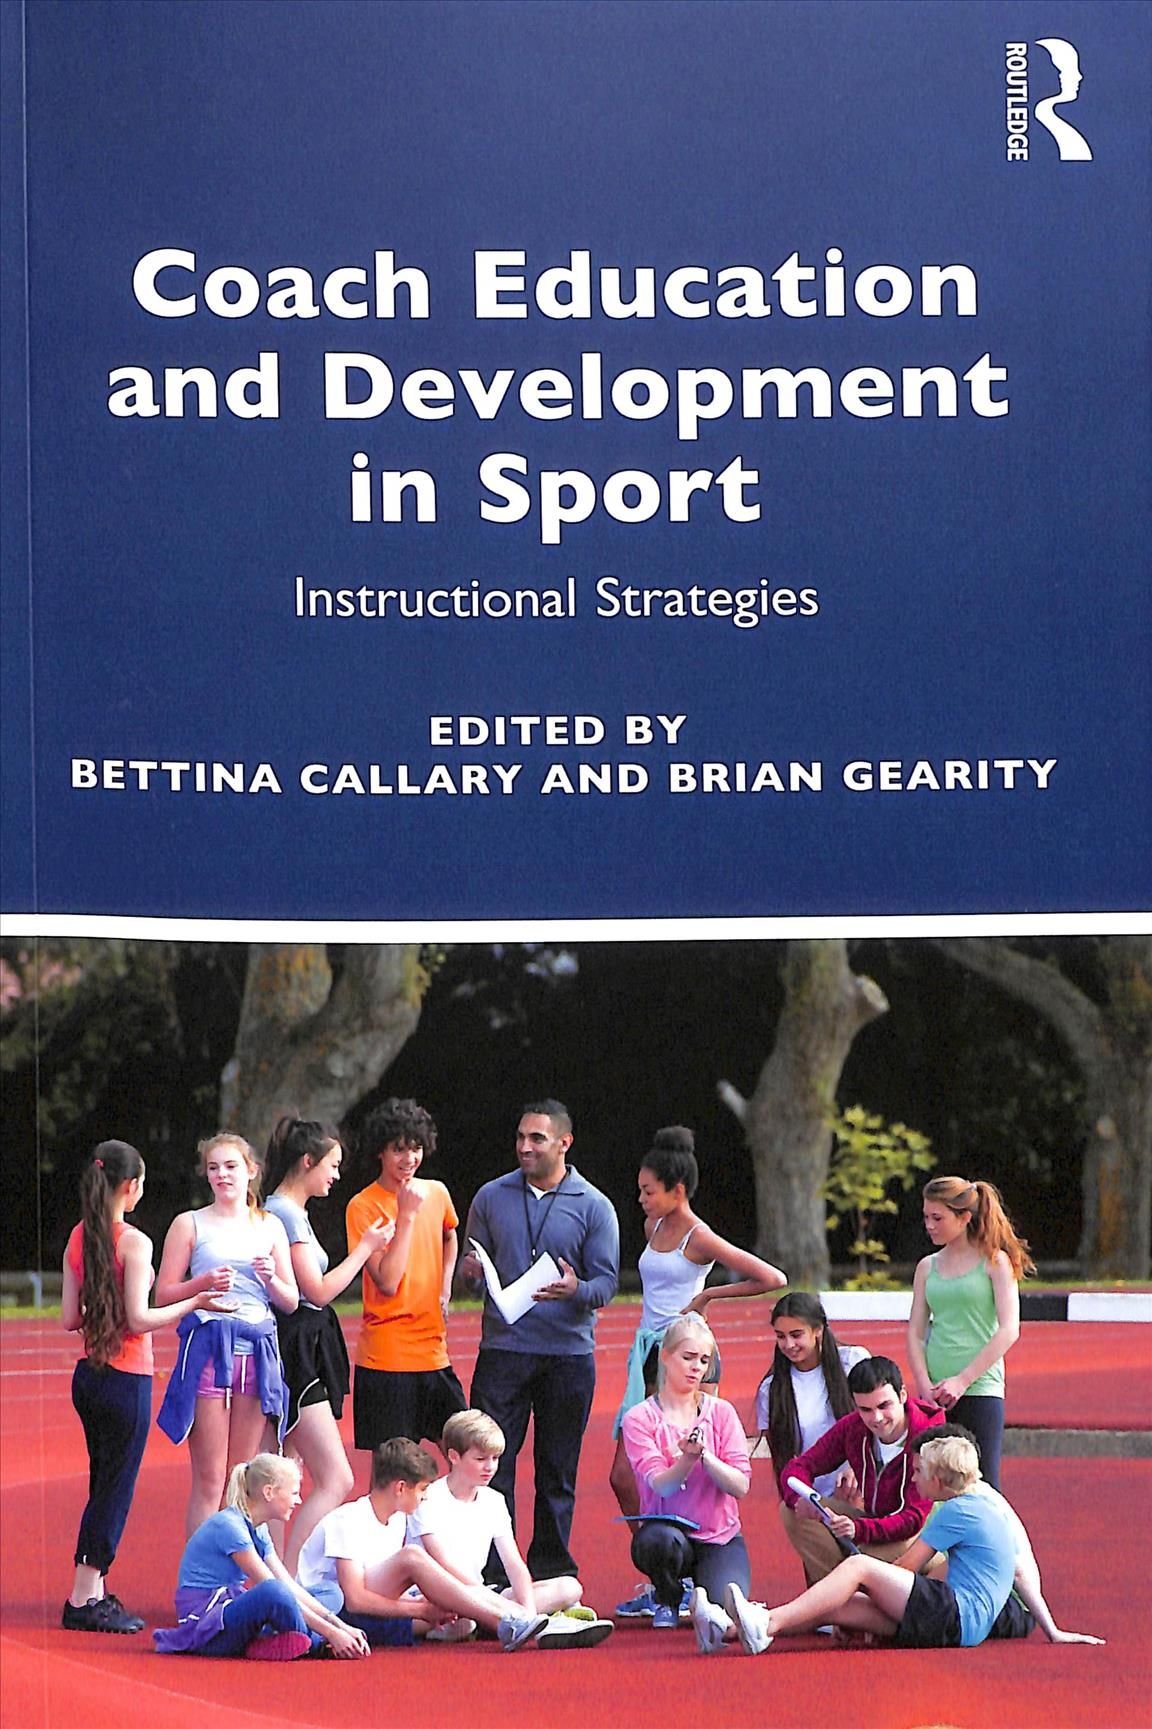 Coach Education and Development in Sport